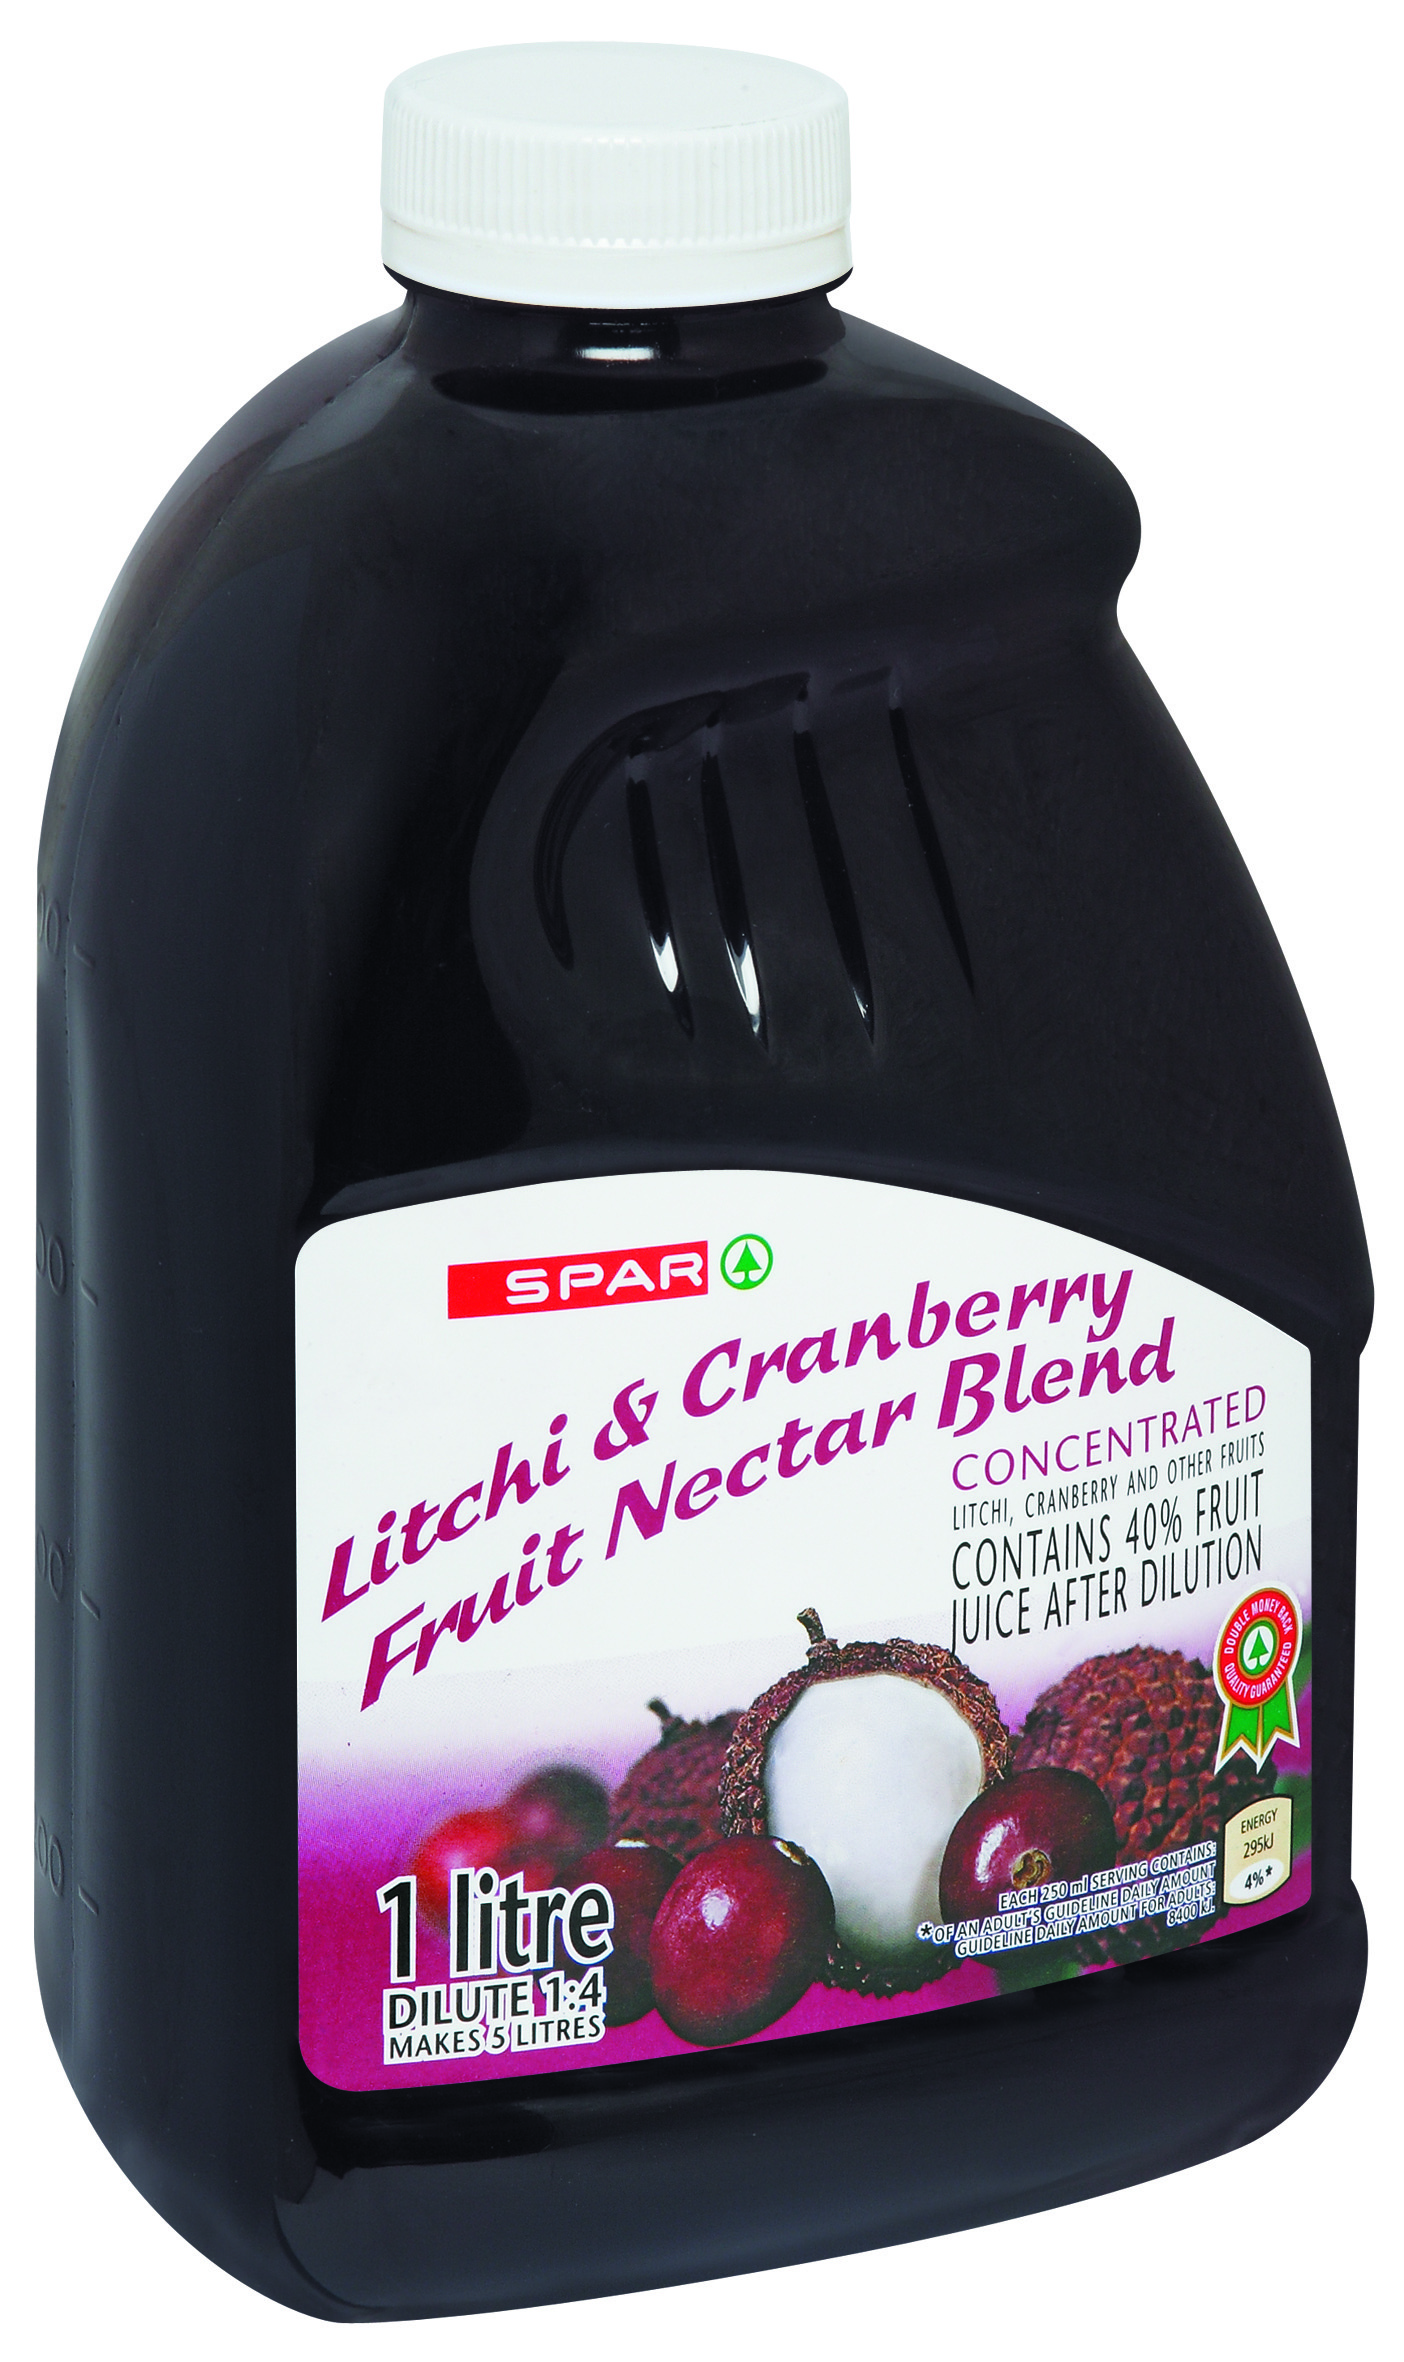 fruit nectar blend - litchi and cranberry  